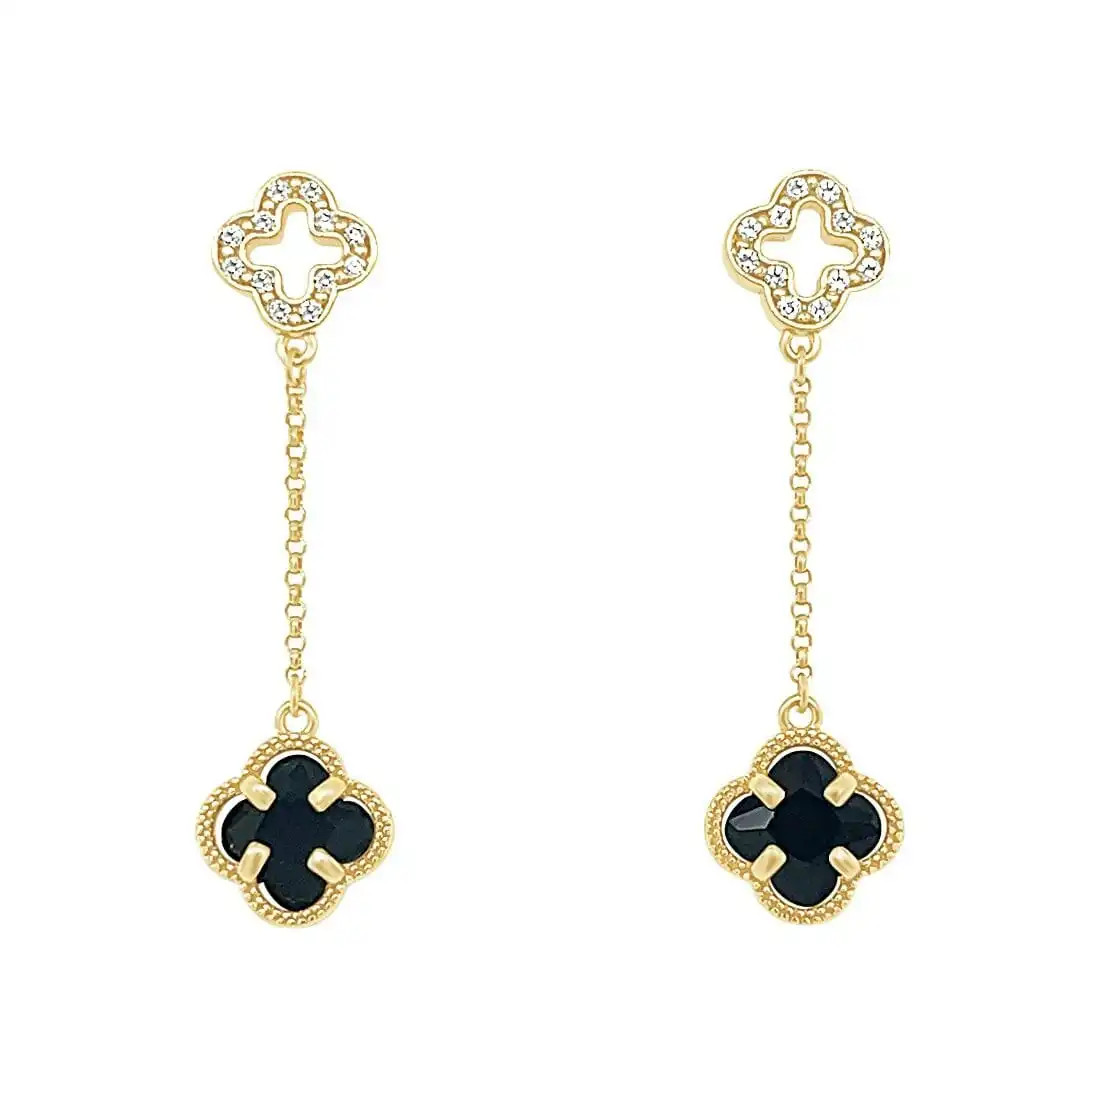 Black Clover Drop Earrings in 9ct Yellow Gold Silver Infused